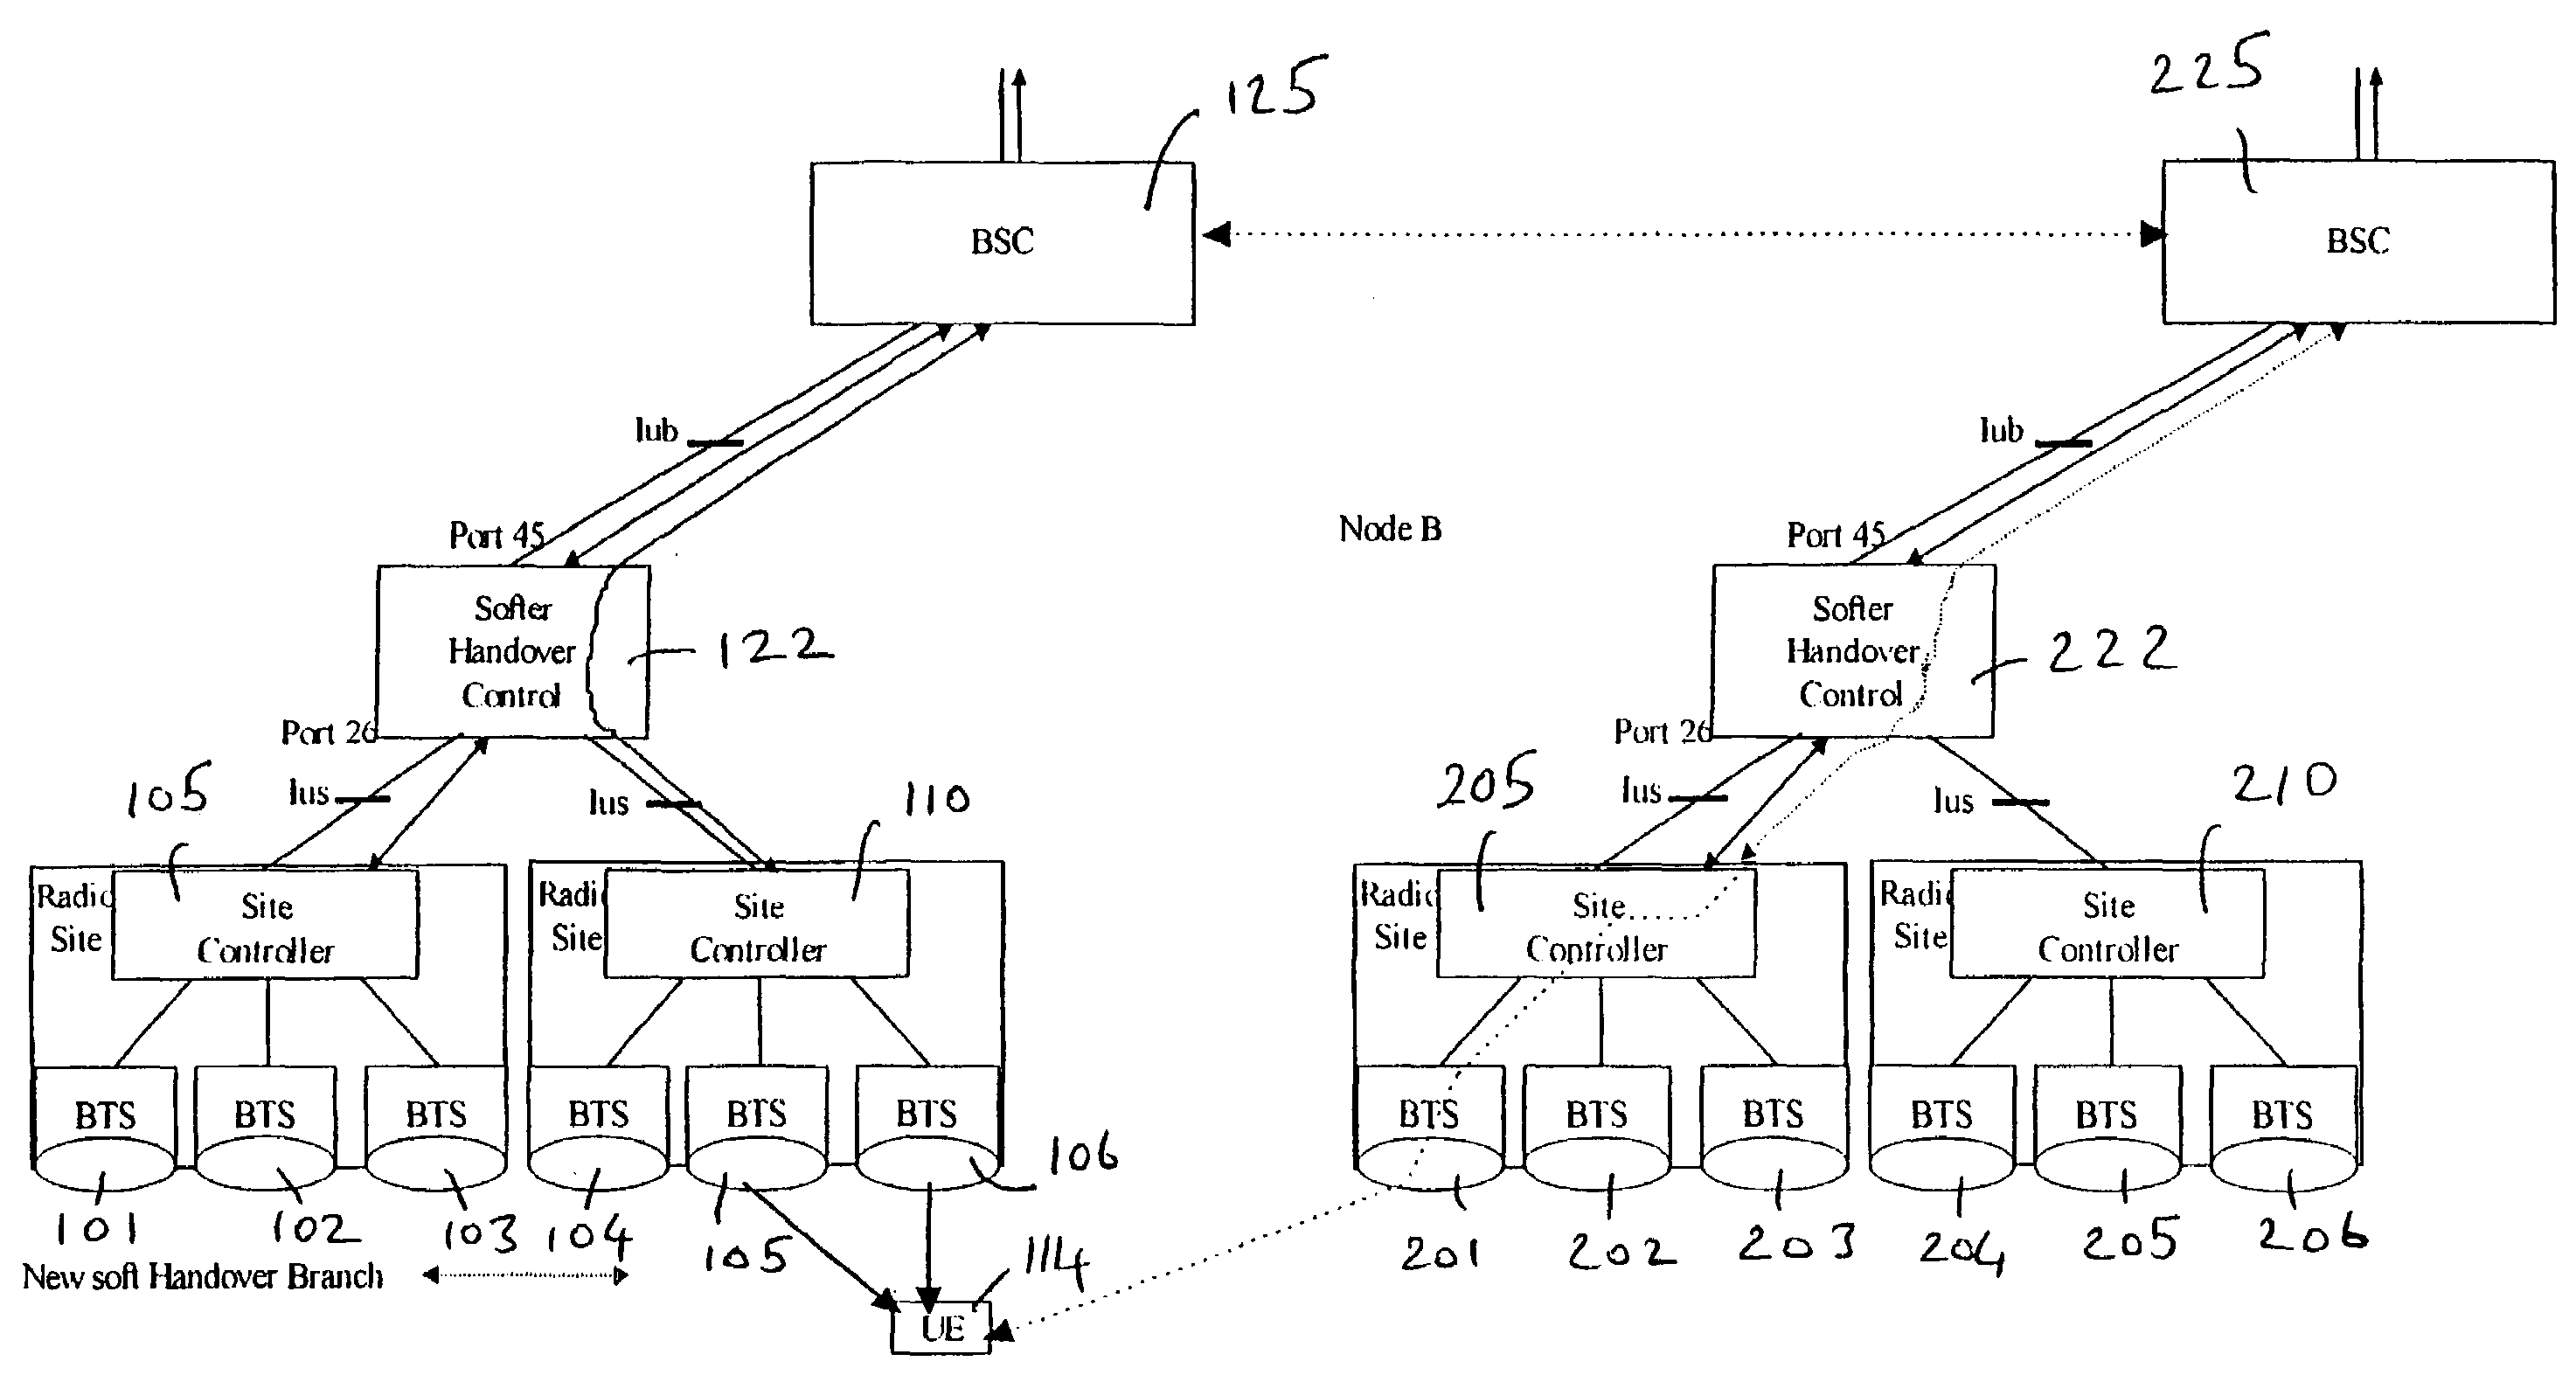 Method and apparatus for setting up a communication with a target base station in a cellular or cordless mobile telecommunications system